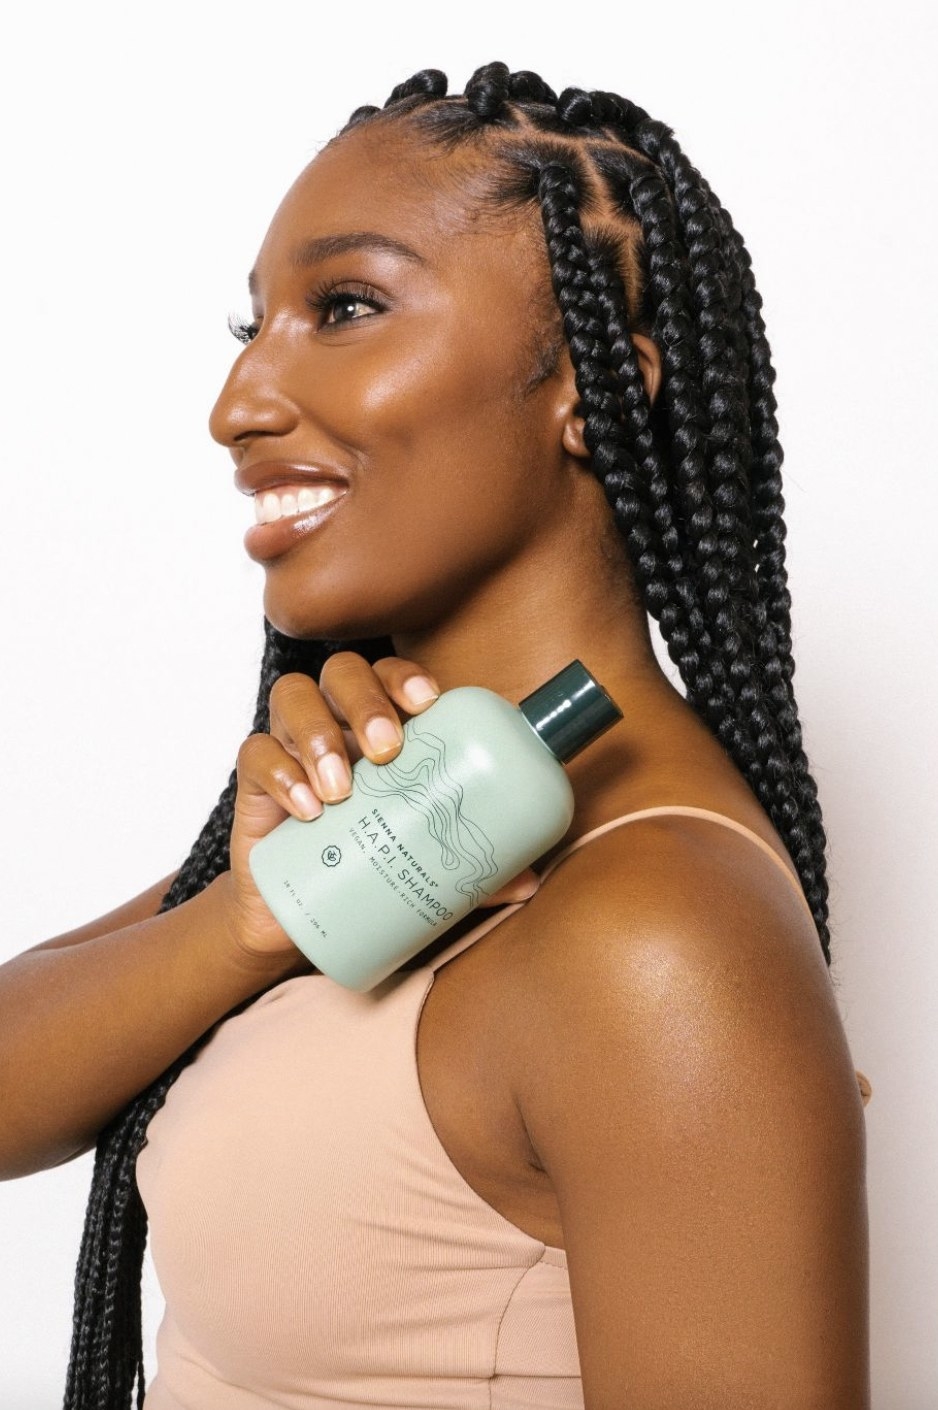 A person with braids holding a bottle of shampoo